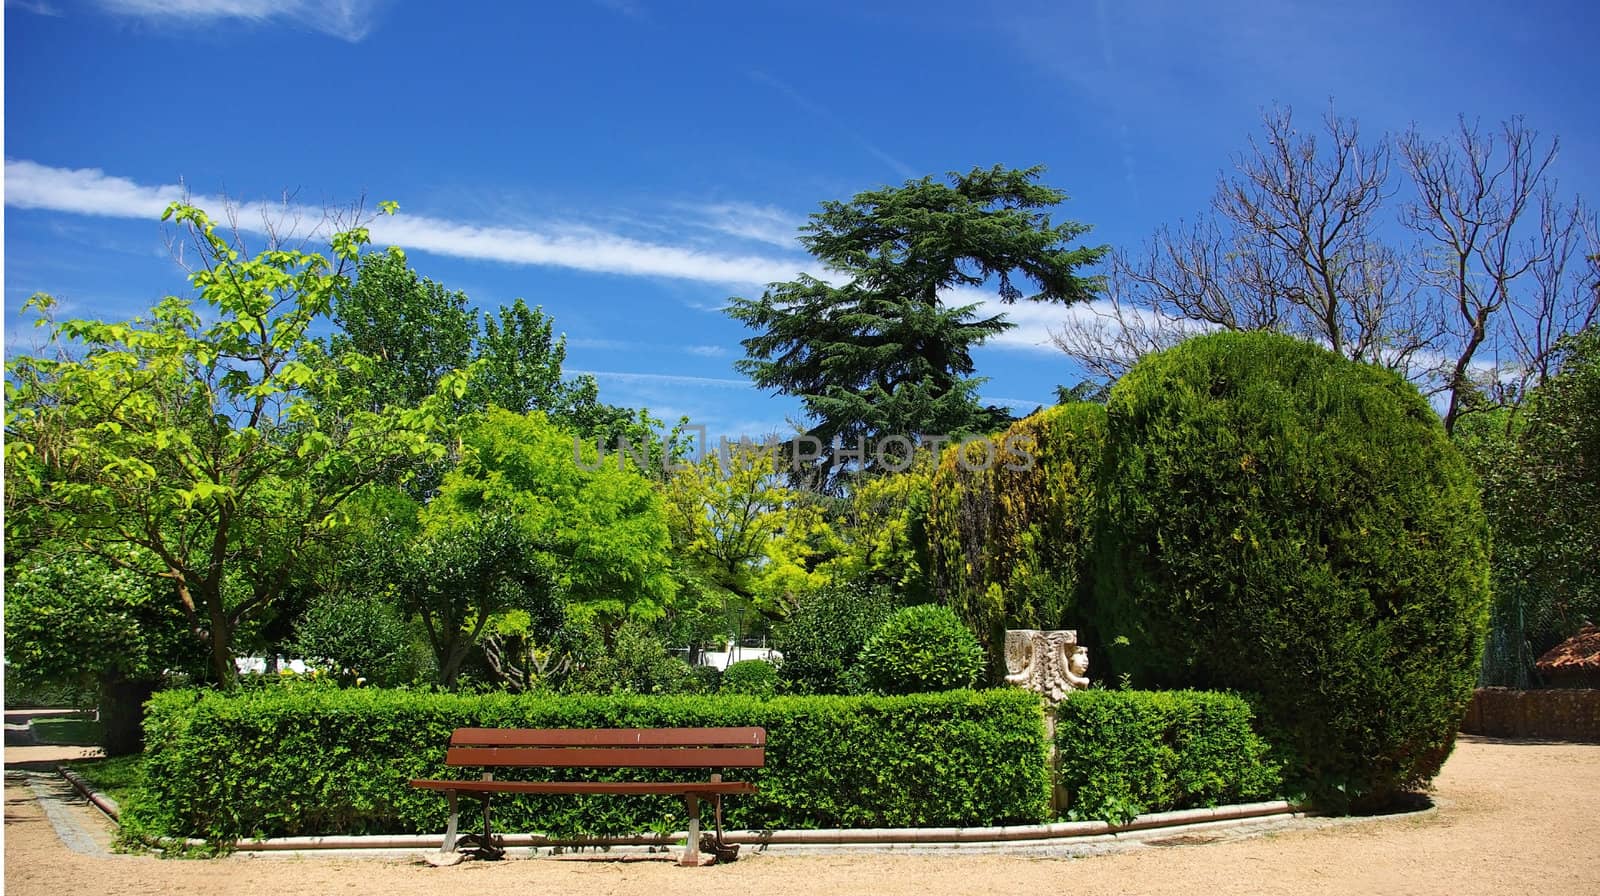 Public garden in a city of the south of Portugal.